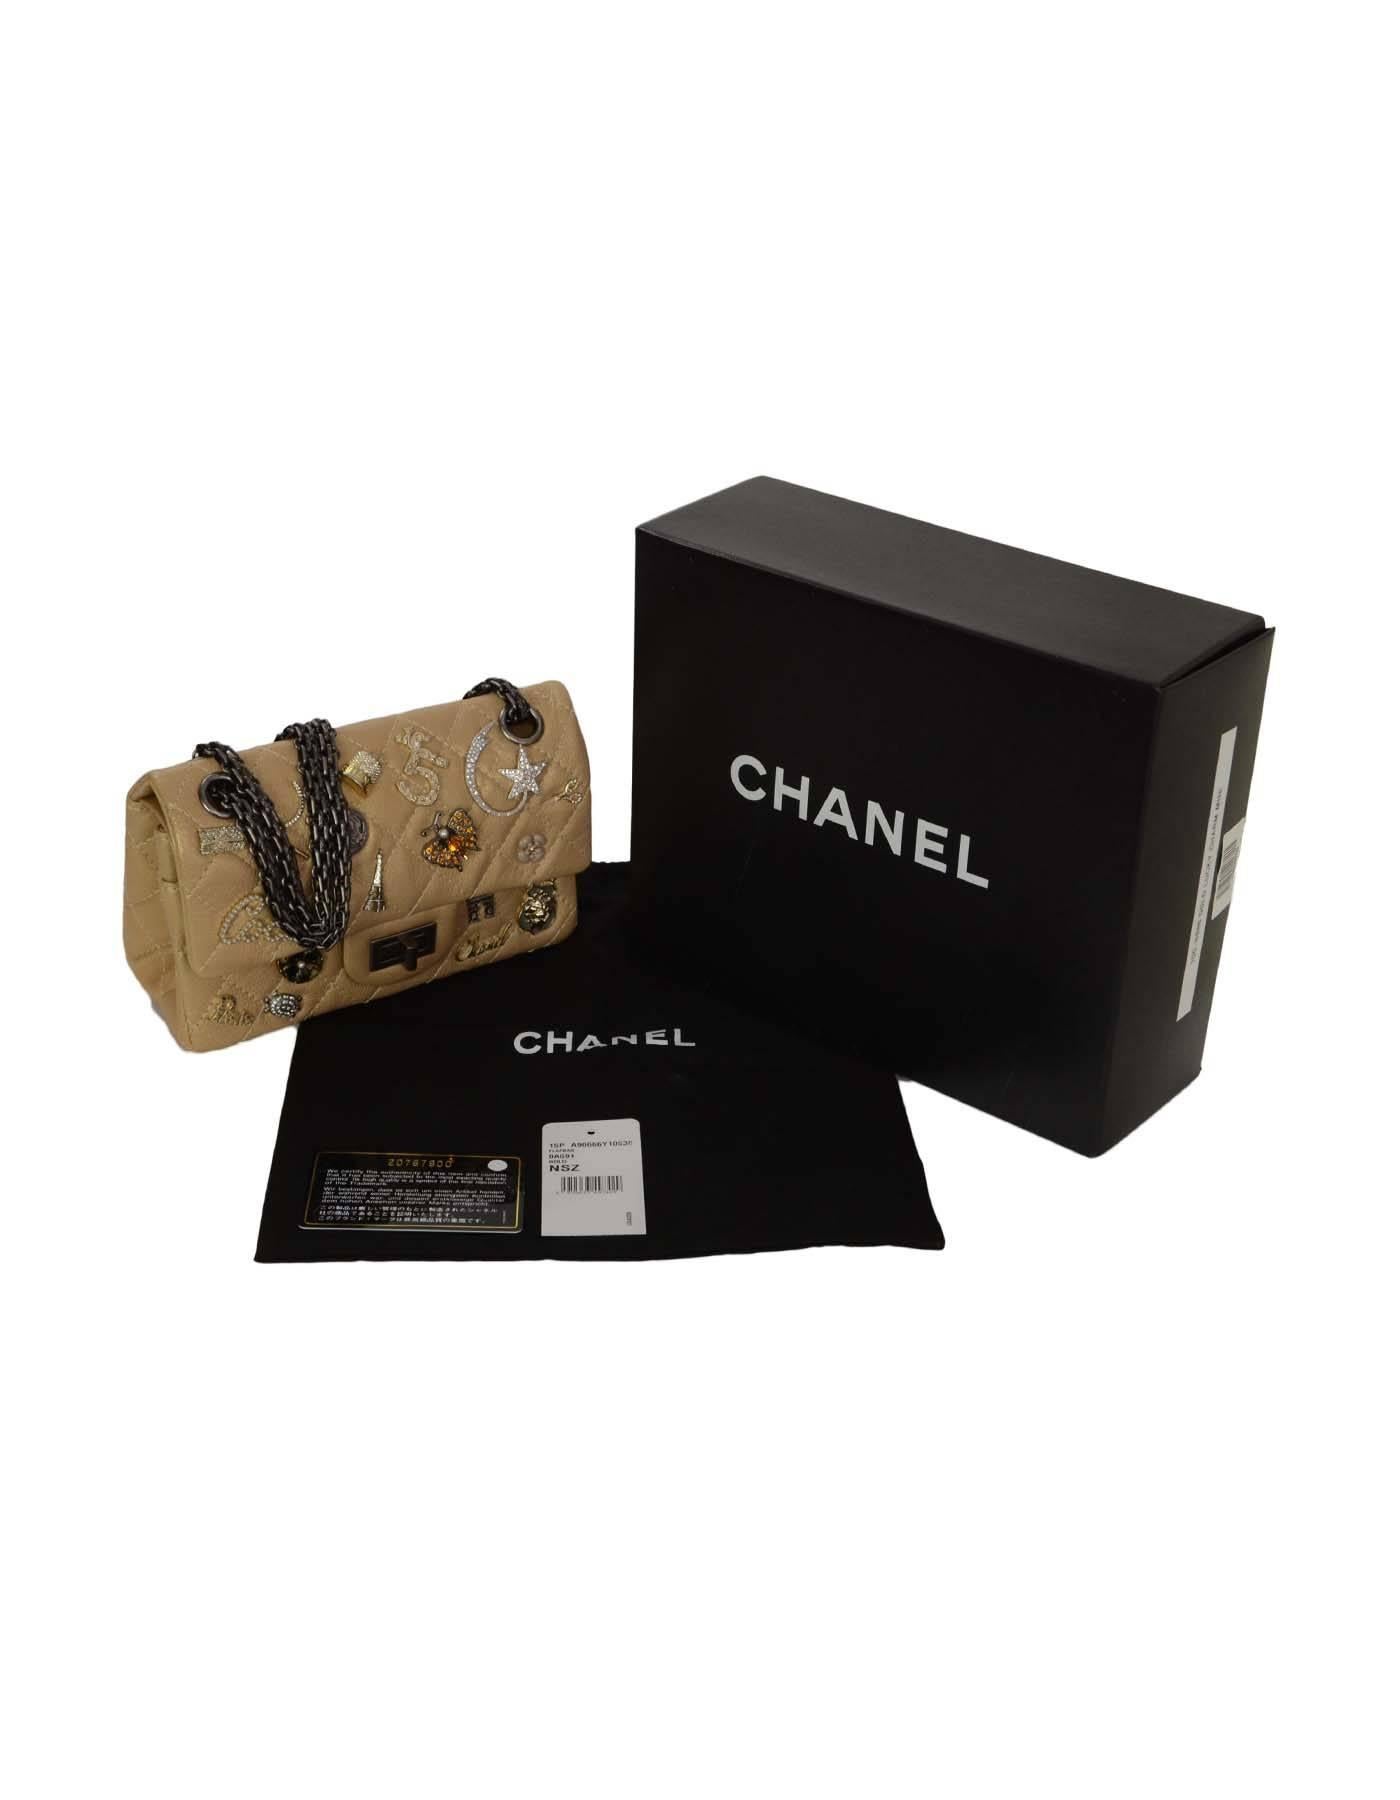 Chanel Rare Collectors Gold Distressed Lucky Charms ReIssue Bag 2.55 rt. $8, 775 4